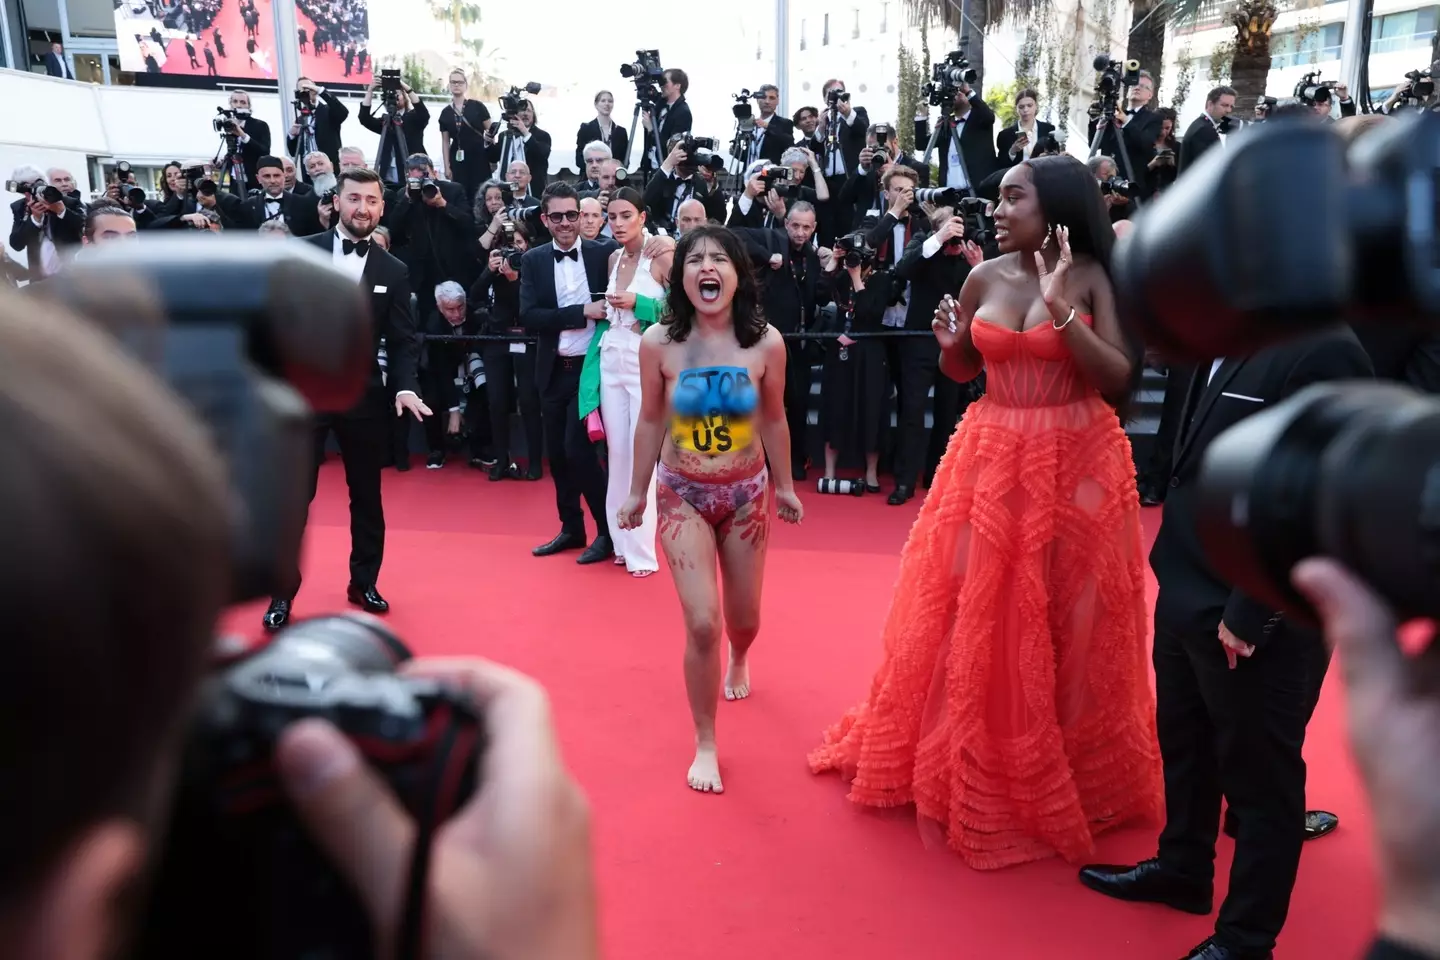 She stormed the red carpet before being removed by security.